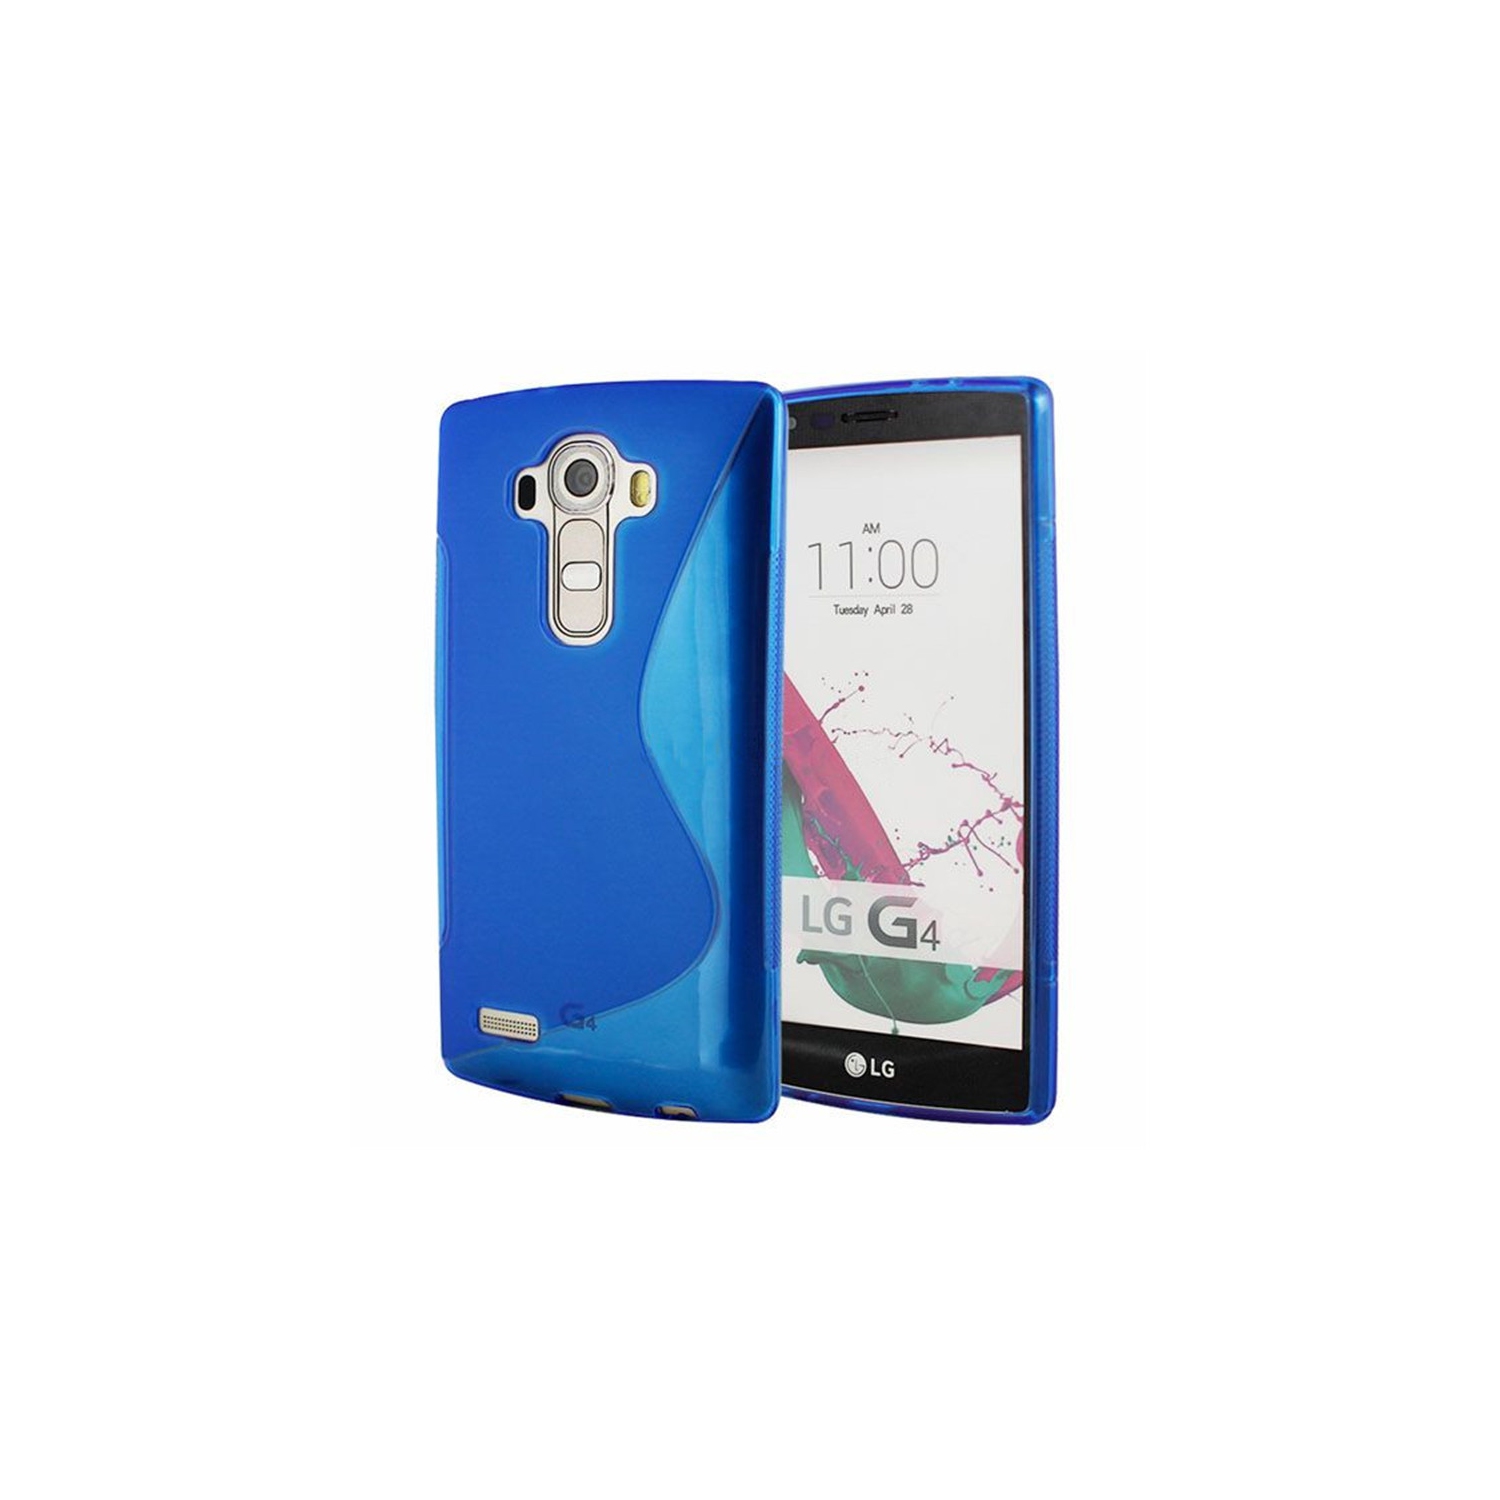 【CSmart】 Ultra Thin Soft TPU Silicone Jelly Bumper Back Cover Case for LG G4, Blue